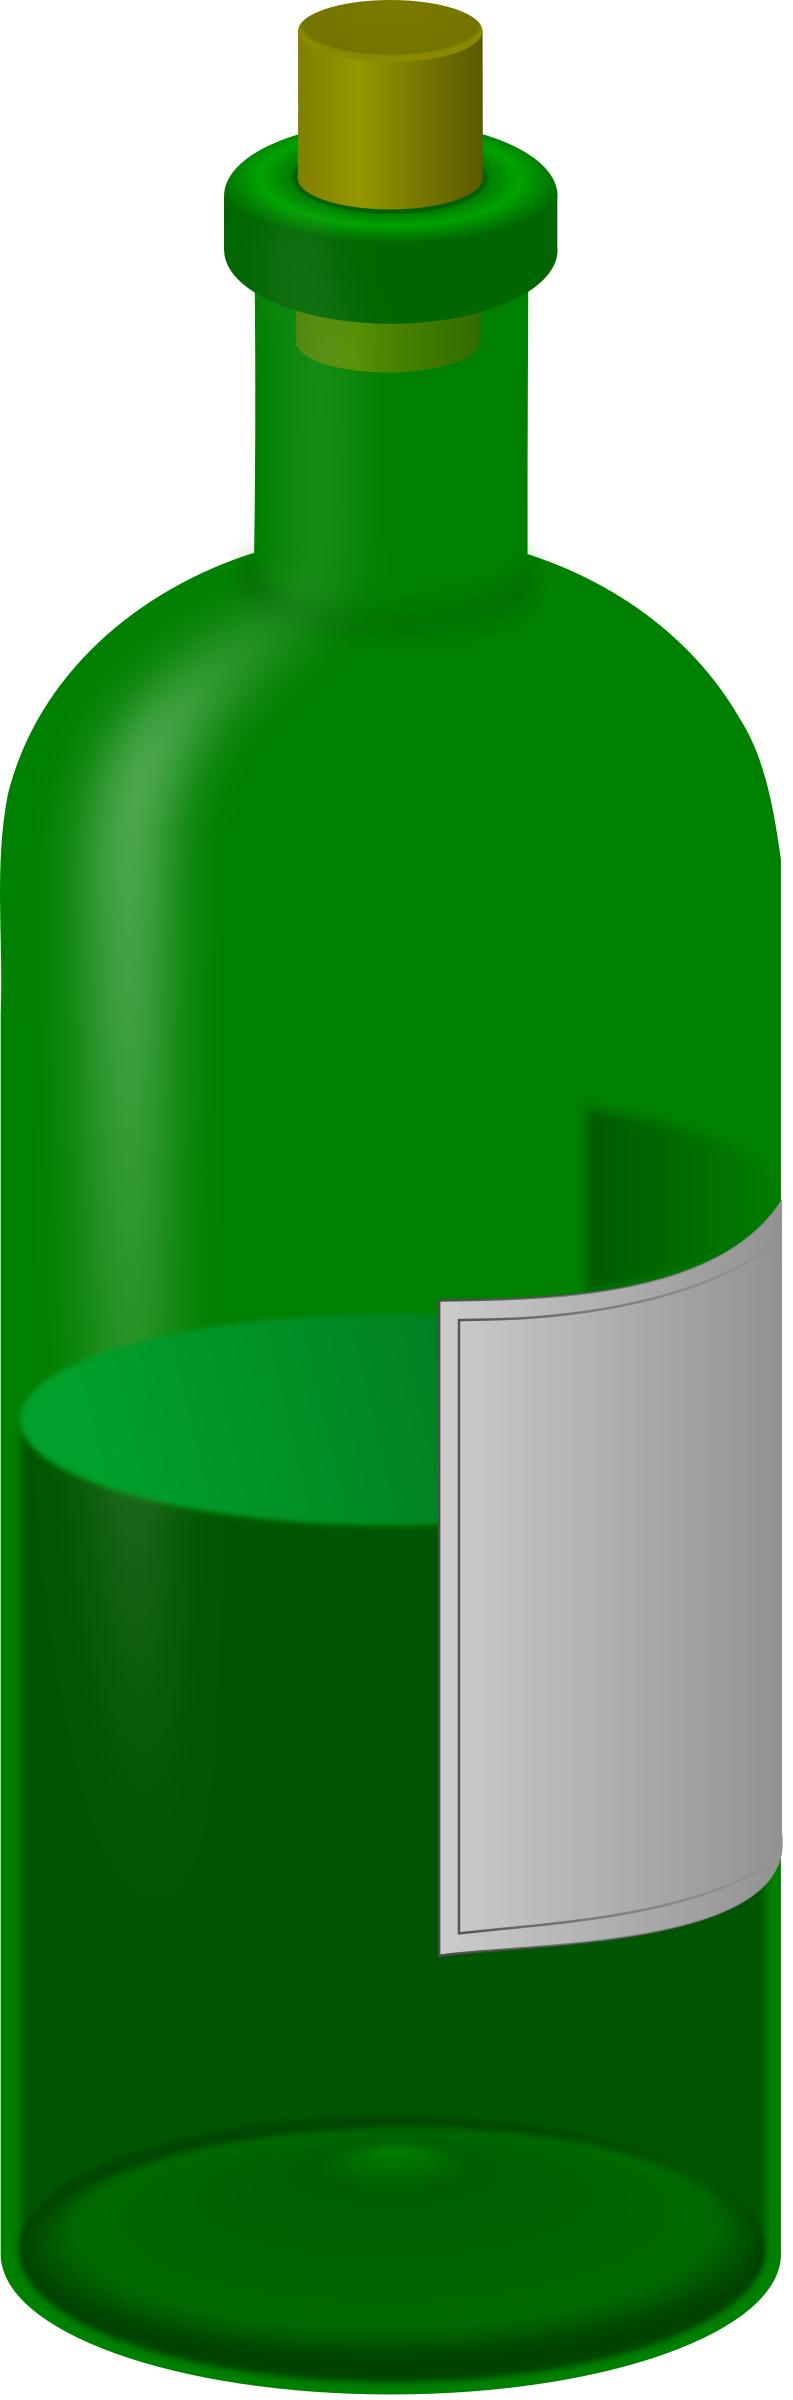 wine bottle with label png